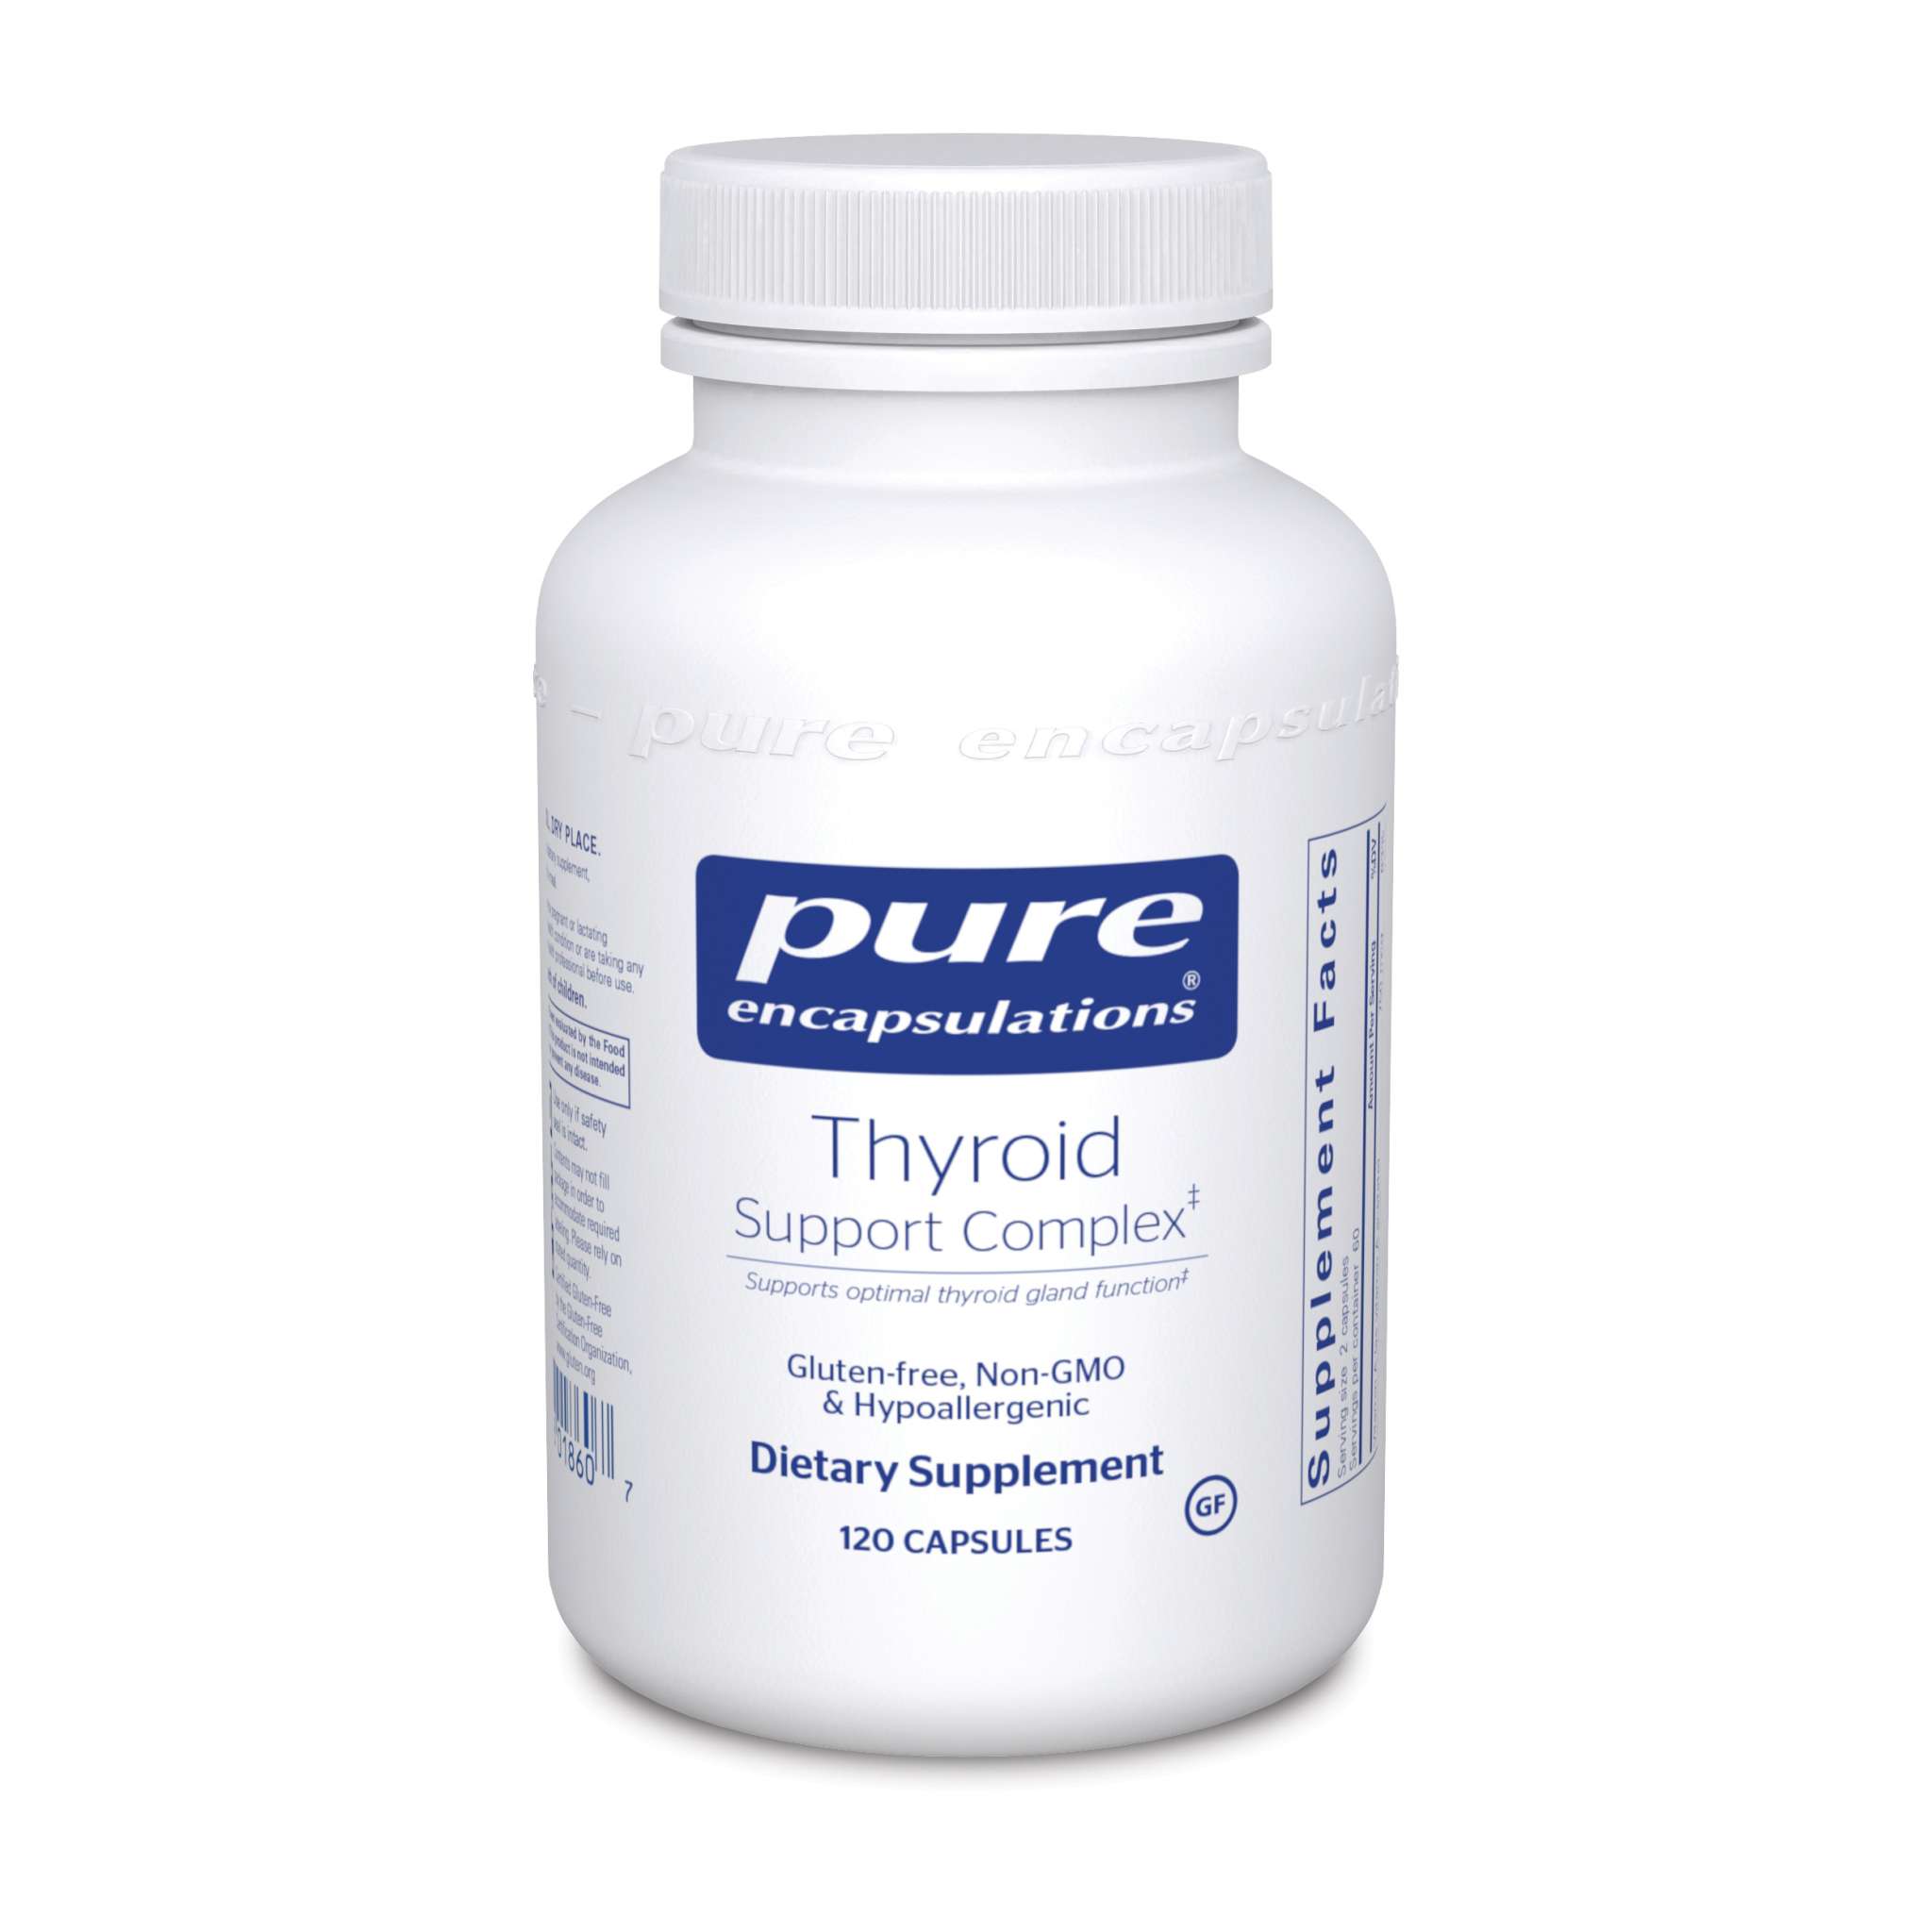 Pure Encapsulations - Thyroid Support Complex